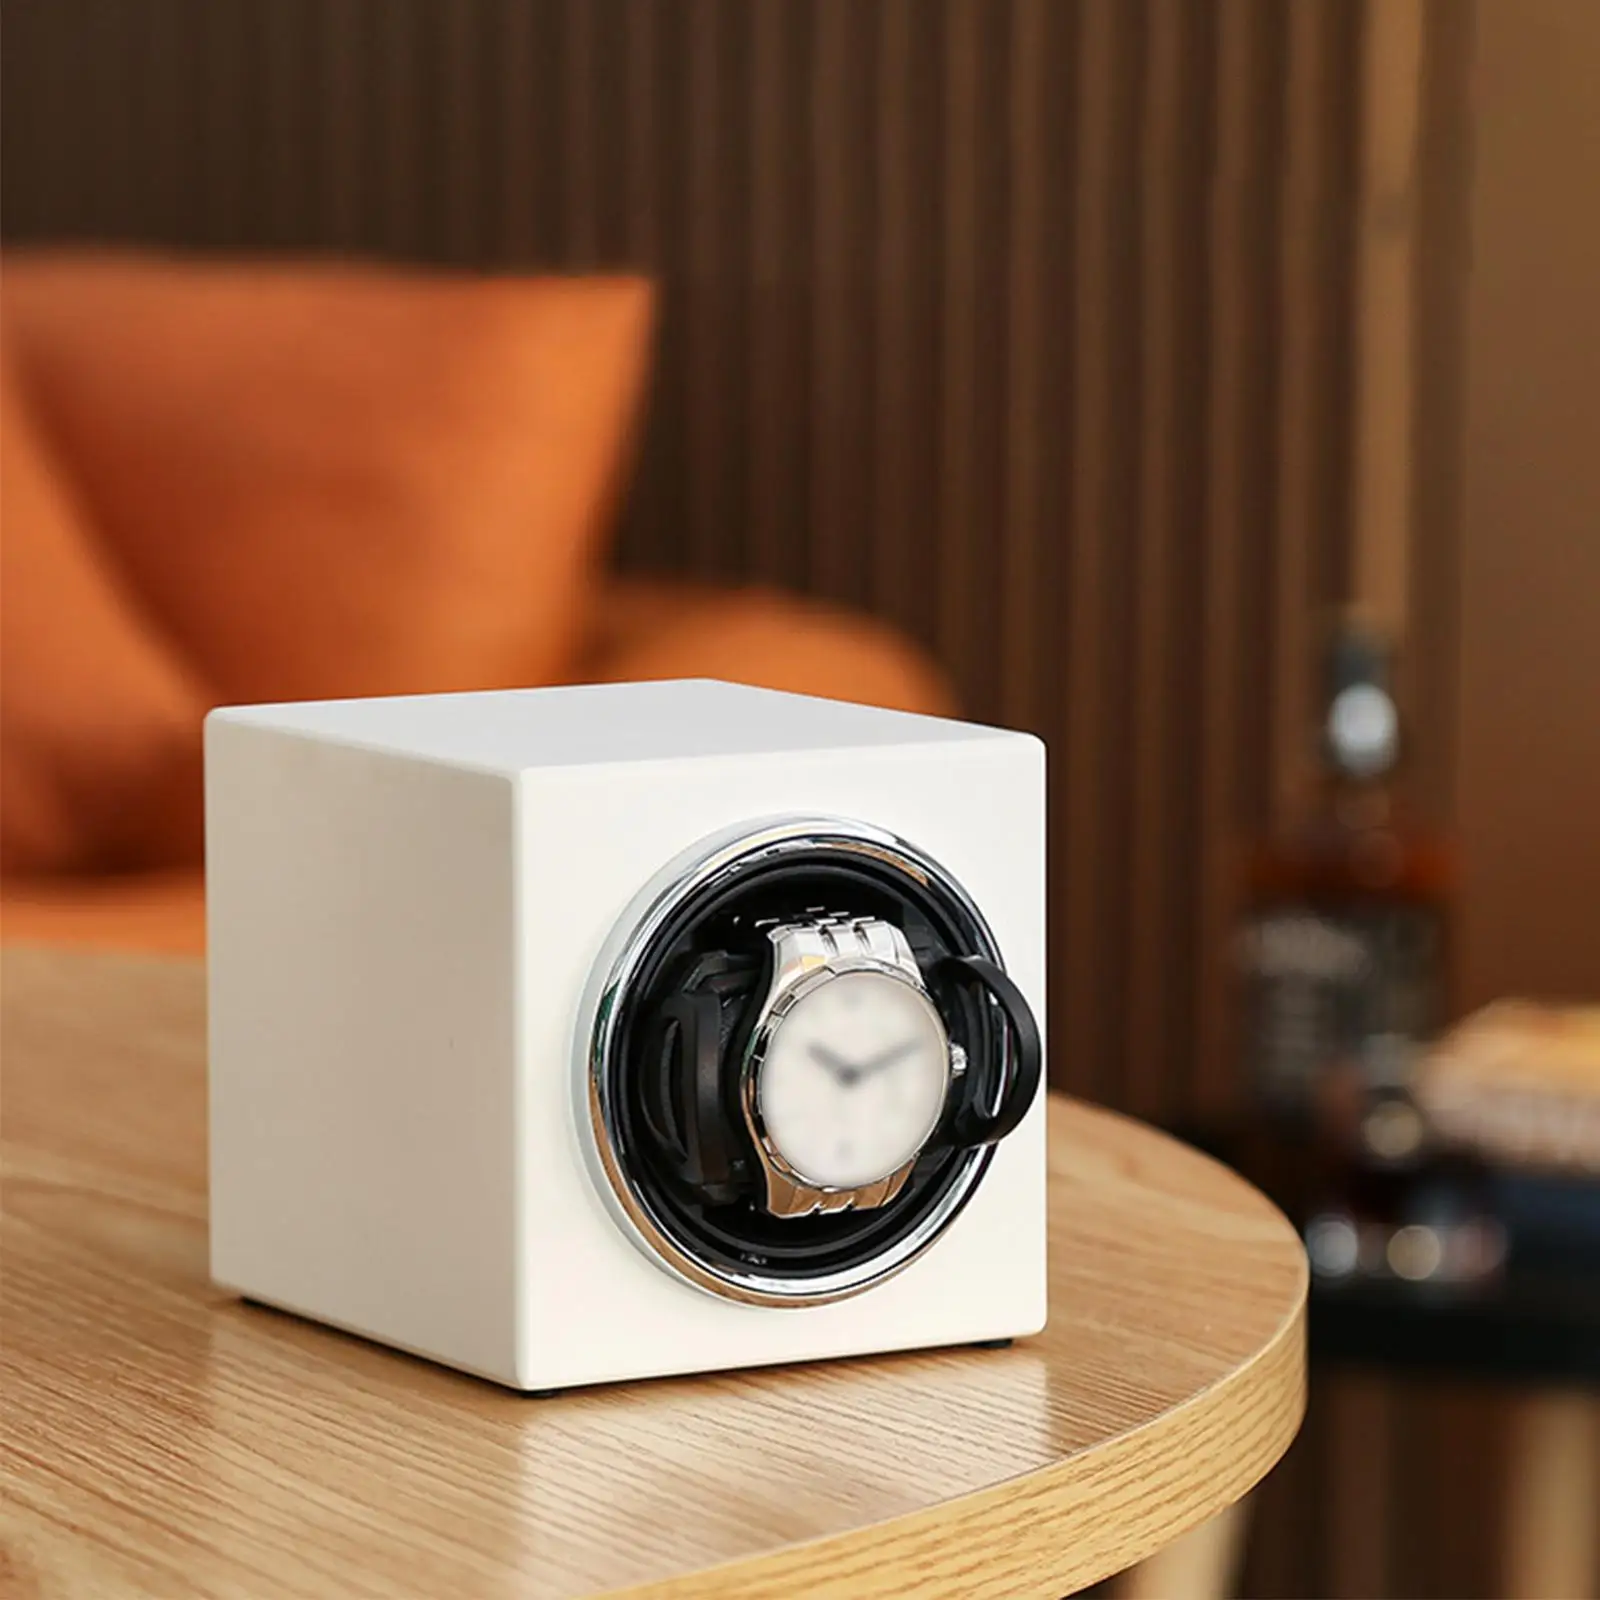 Automatic Single Watch Winder 2 Rotation Mode Jewelry Storage Quiet Motor USB Winding Box Watch Holder for Mechanical Watches